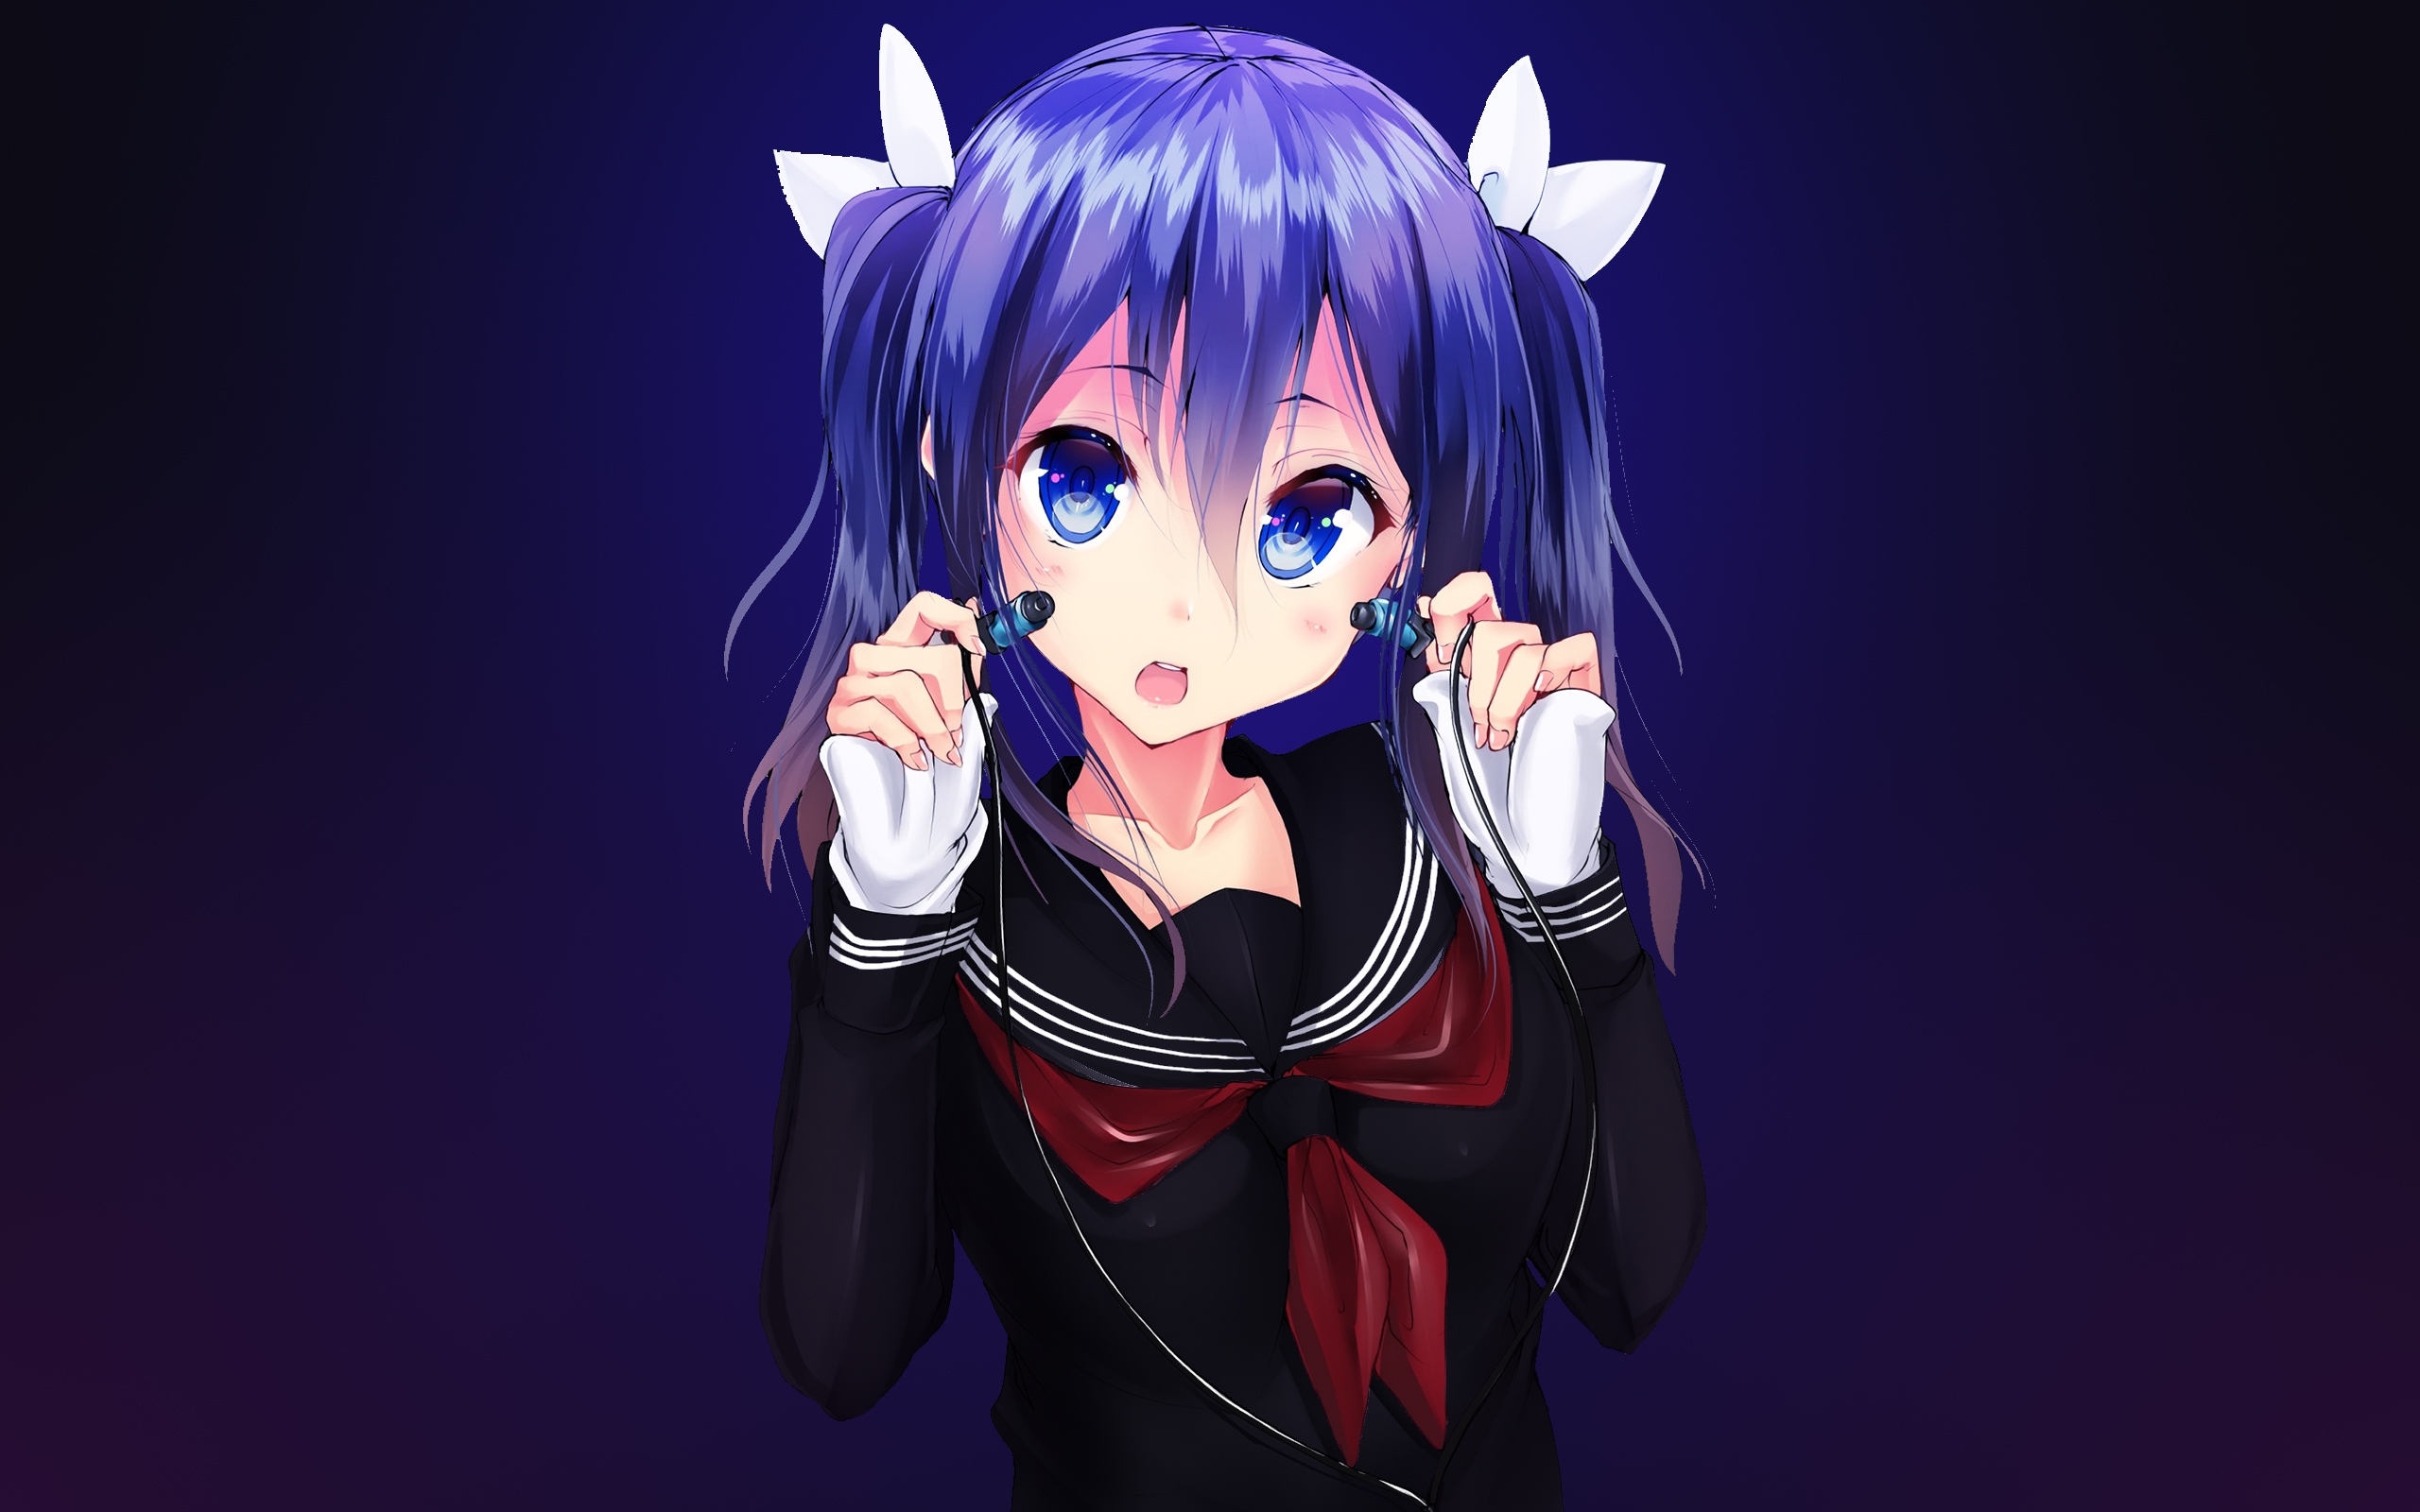 4. Anime girl with curly blue hair and headphones - wide 7